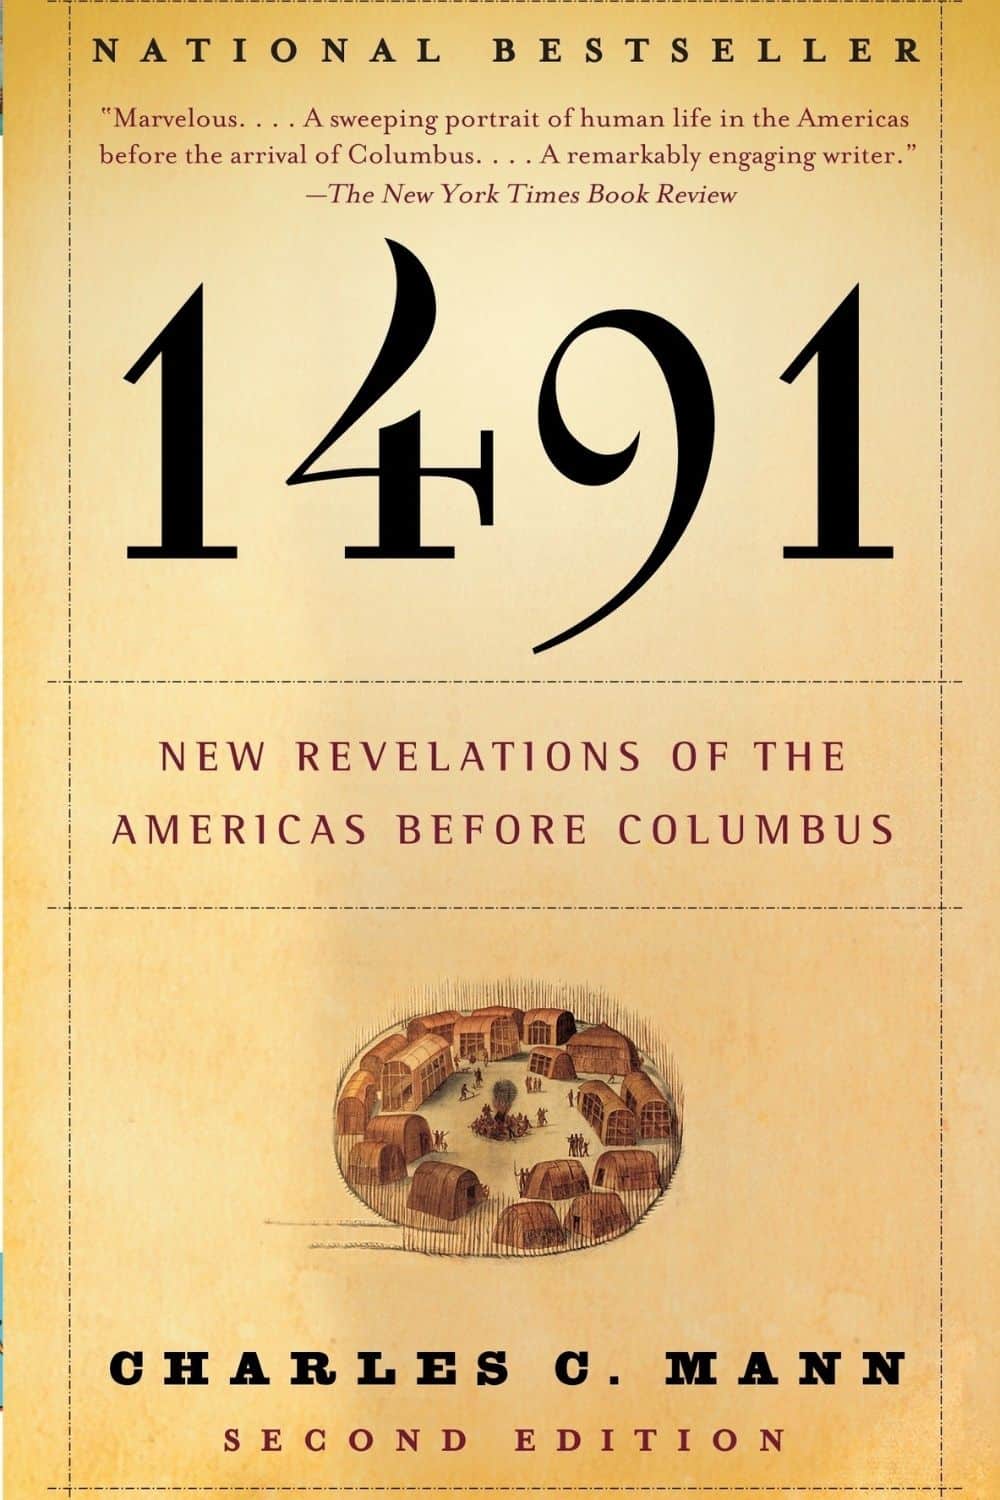 10 Best Books On American History